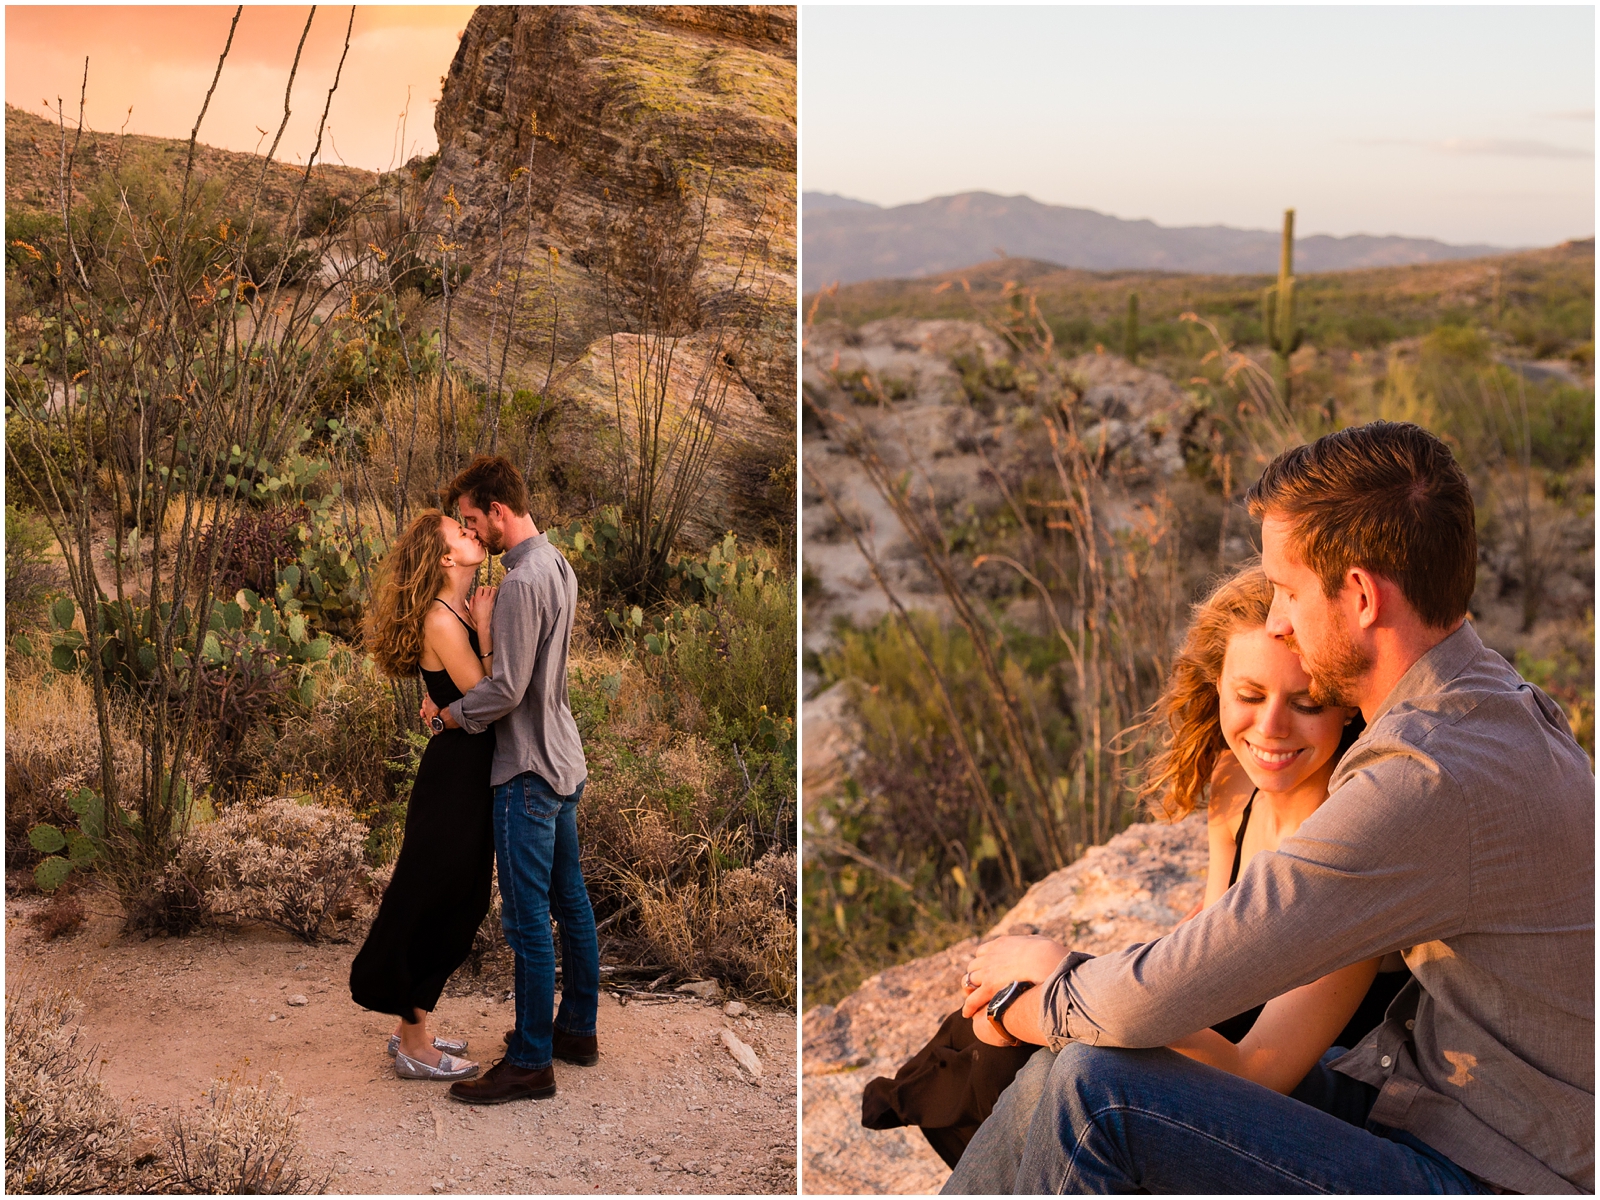 This couple met and fell in love in Tucson, AZ. To celebrate they had me take some photos of them in one of their favorite places in town, Saguaro National Park. | Clarissa Wylde Photography